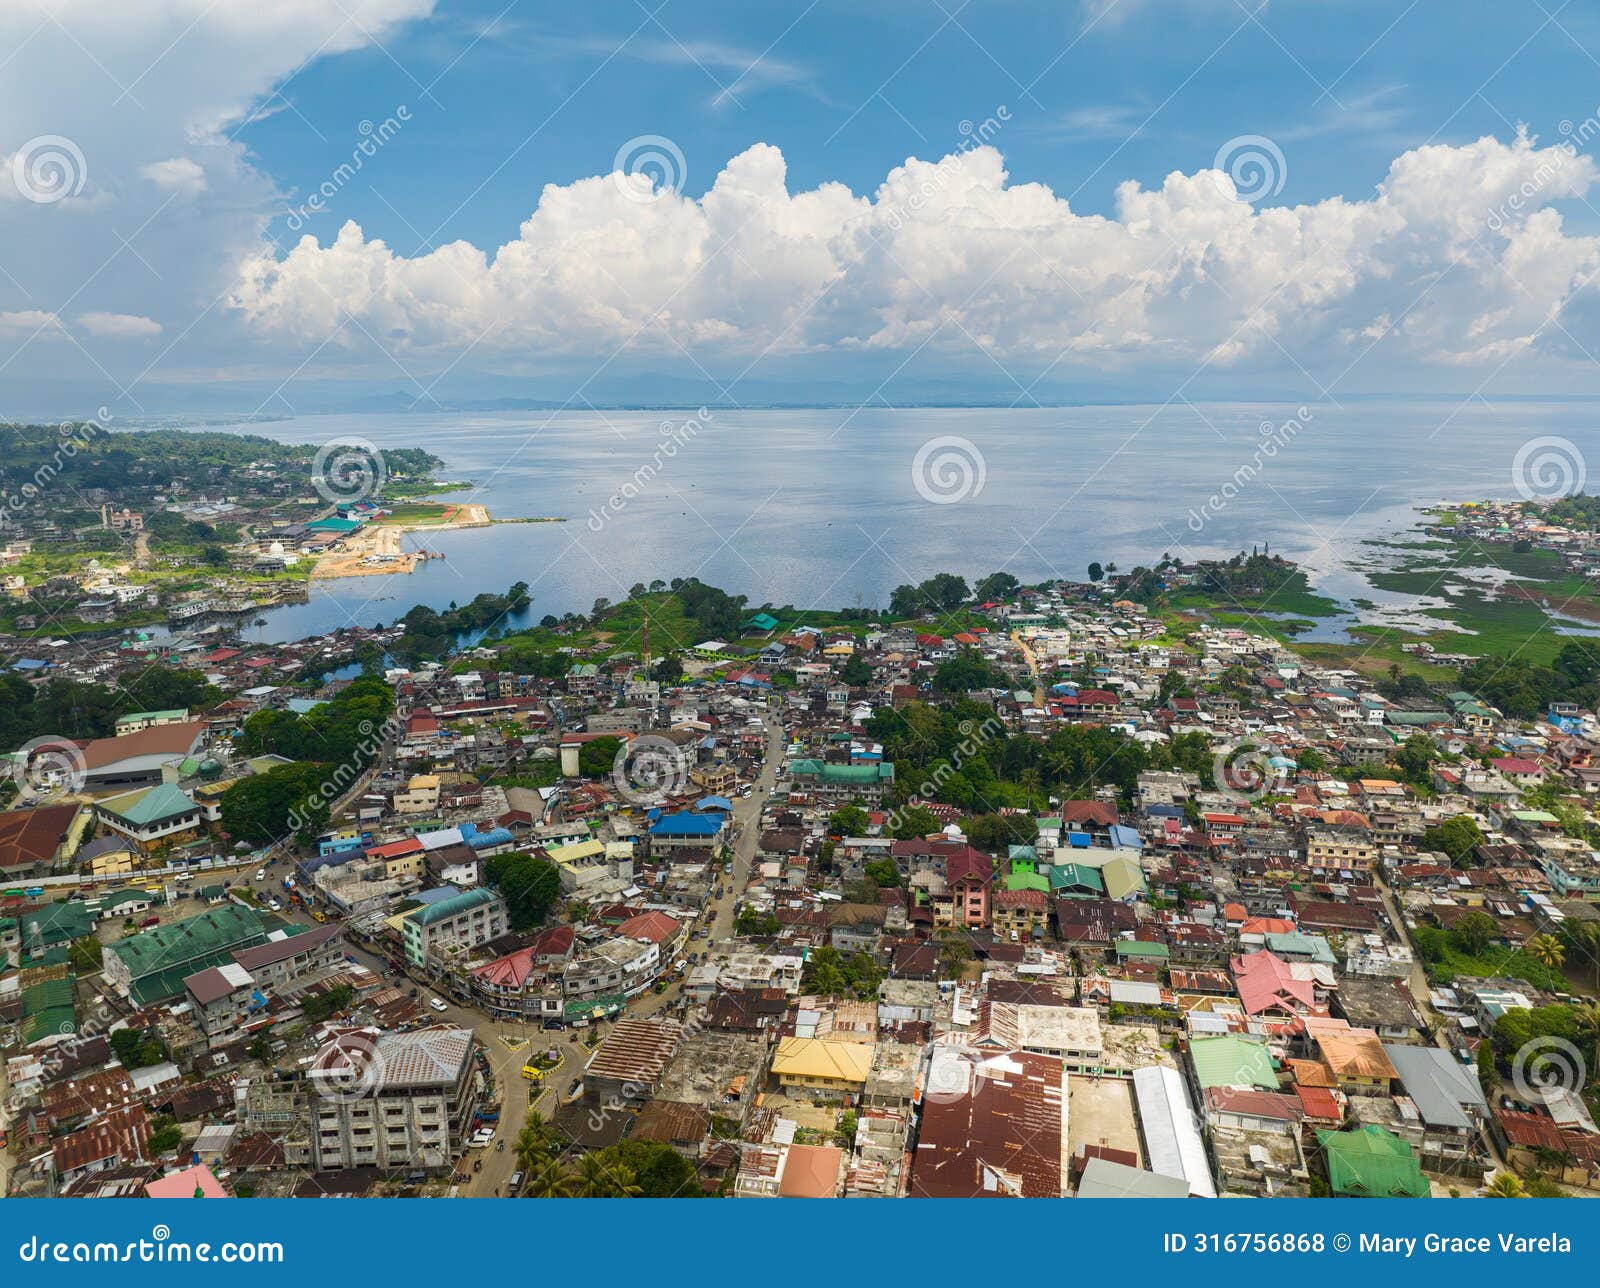 marawi city in lanao del sur in the philippines.